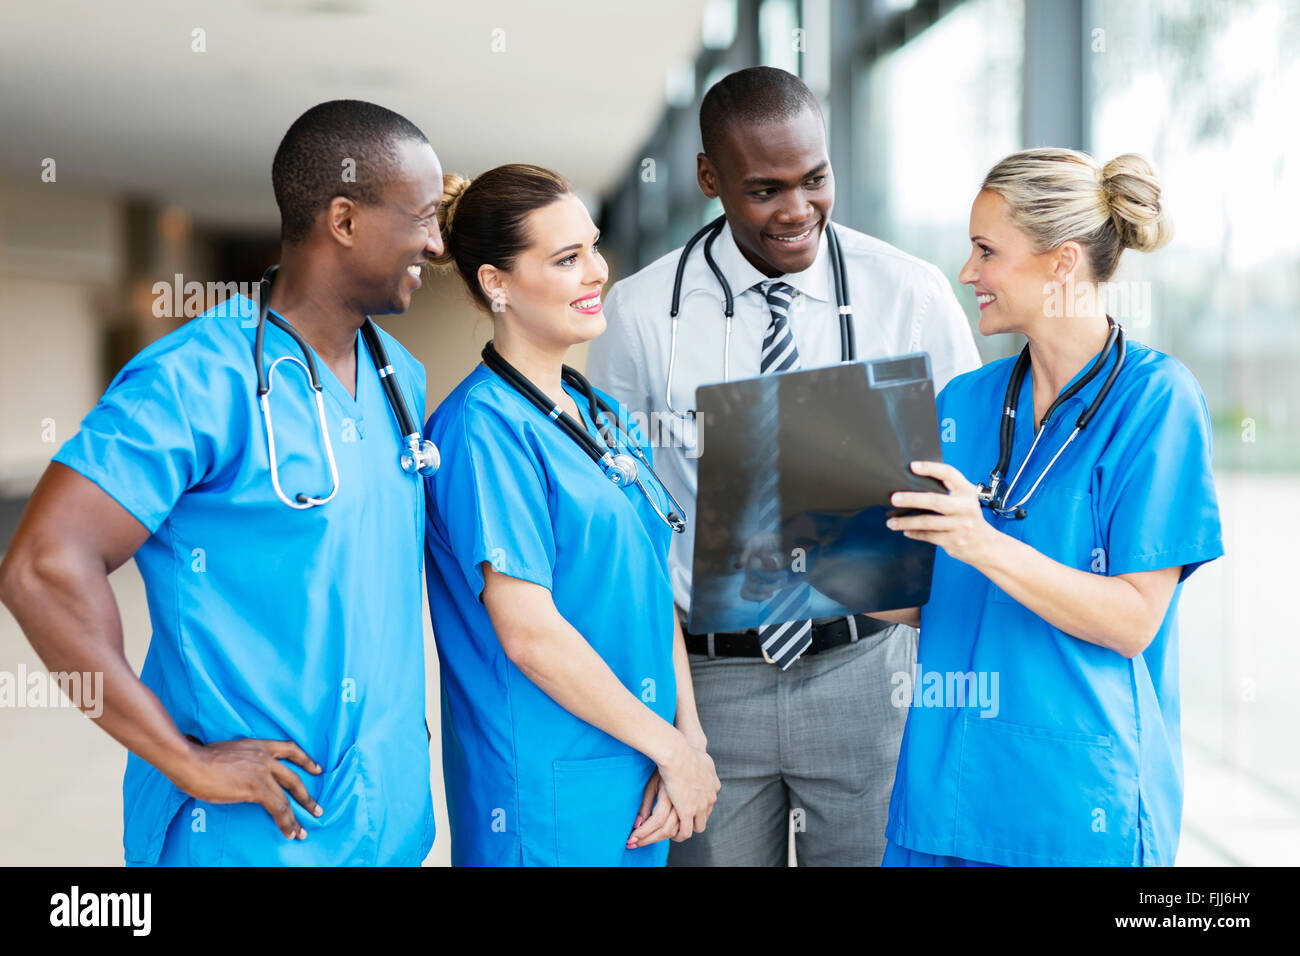 successful medical team working together in hospital Stock Photo